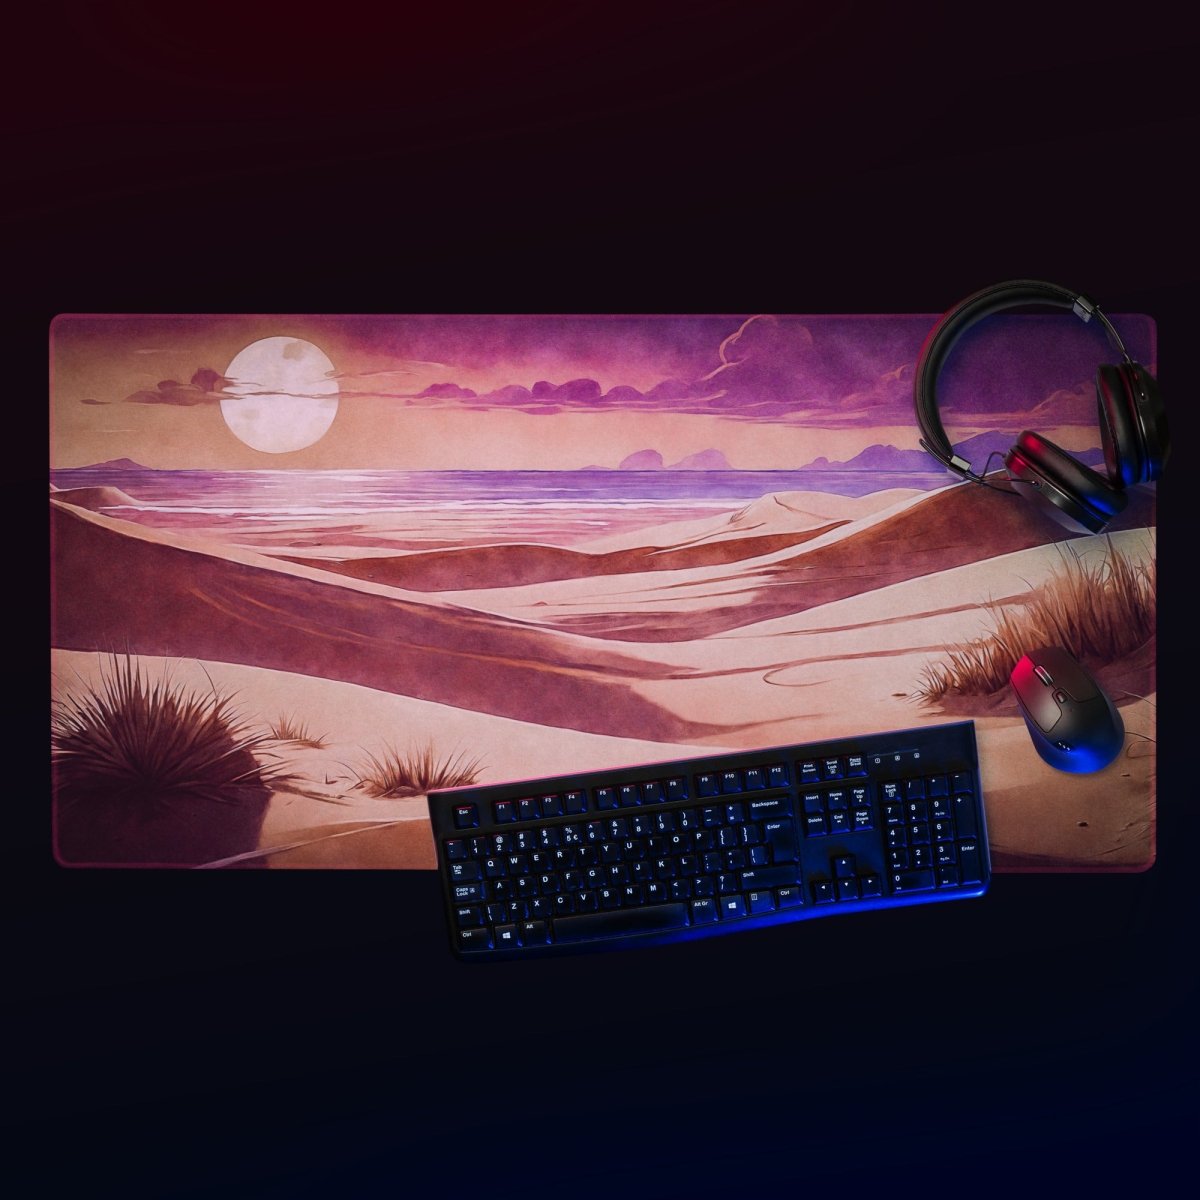 Misty desert sands - Gaming mouse pad - Ever colorful